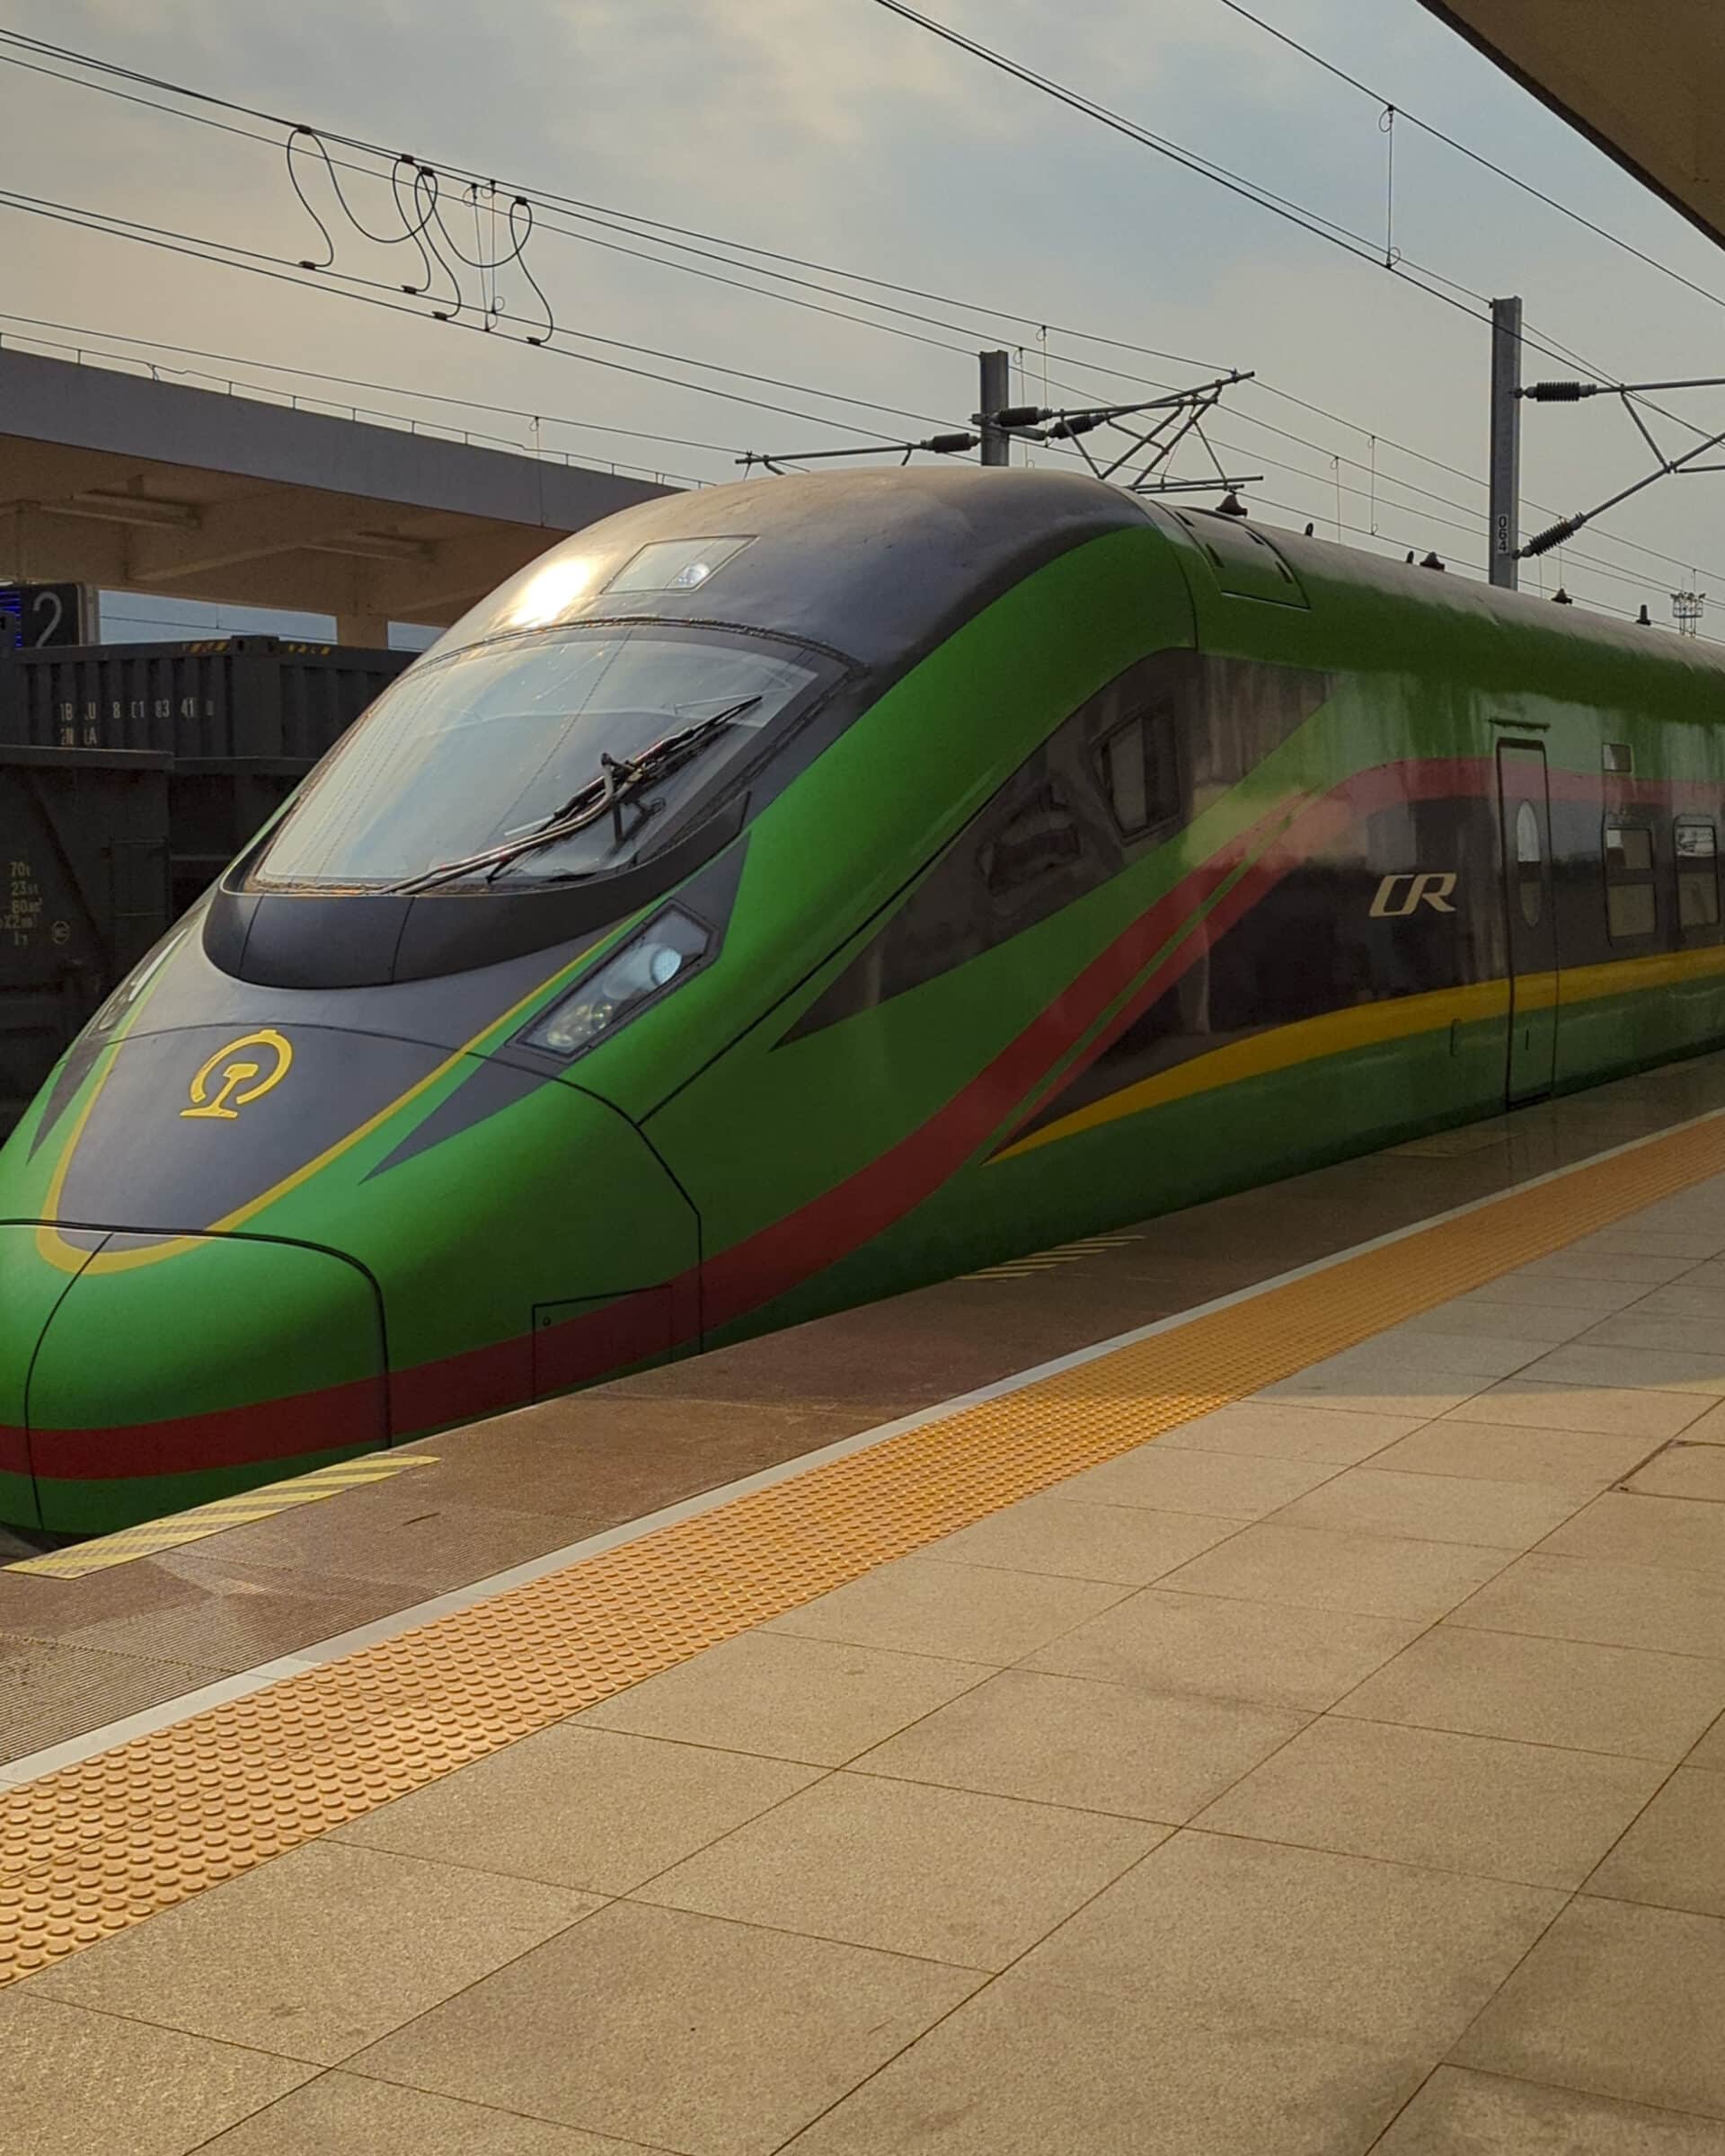 One of the Chinese LCR trains